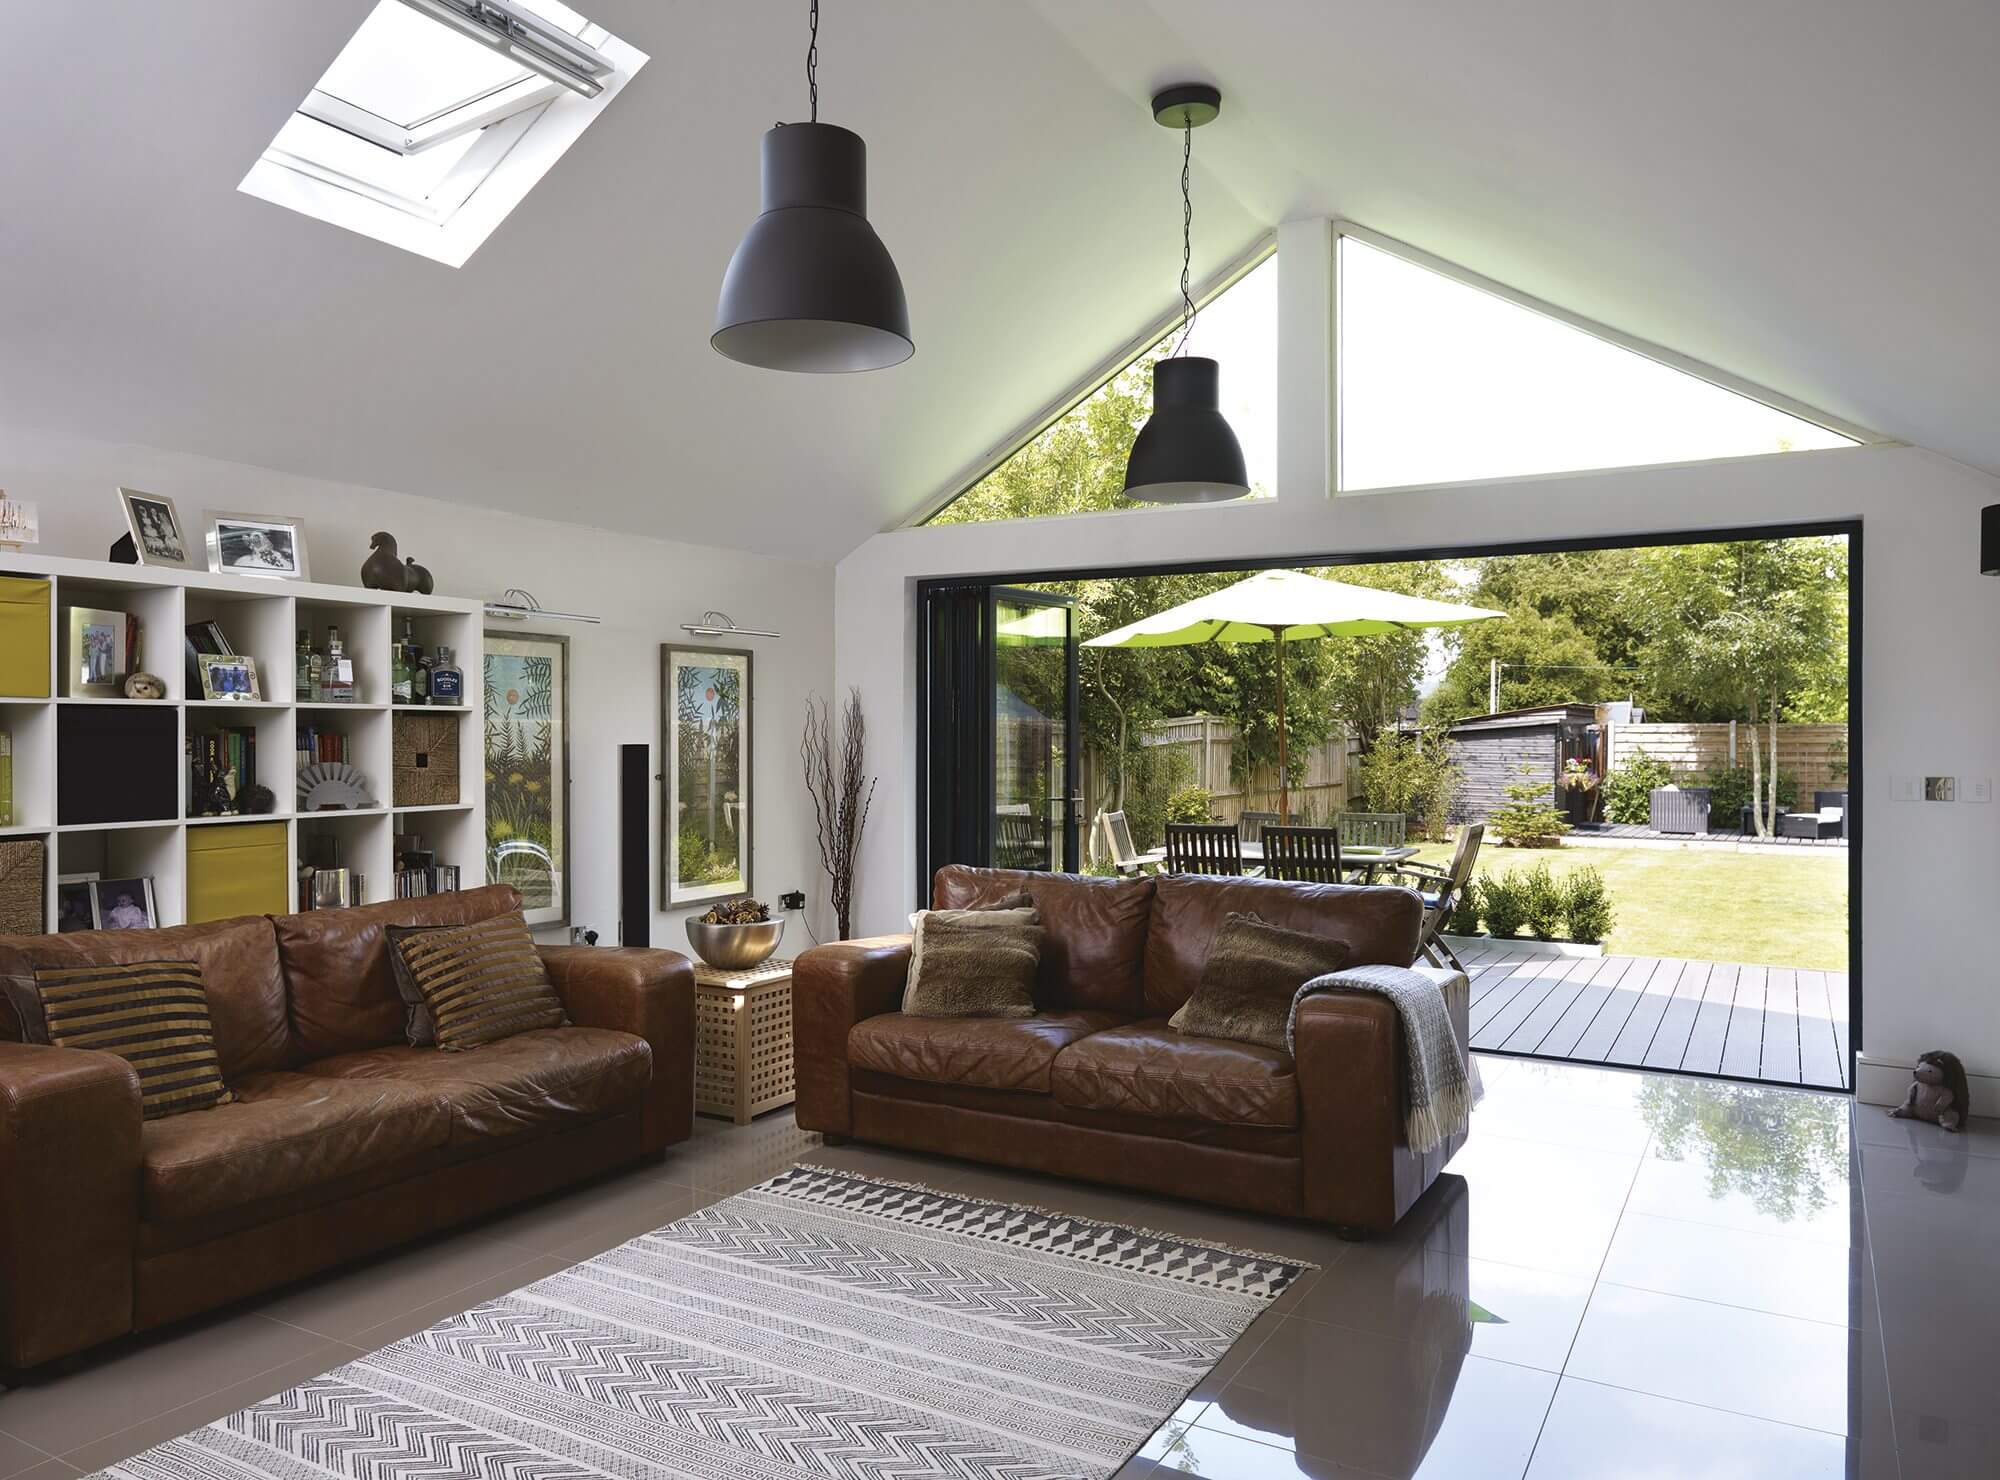 bifold doors and glazed gable in living room